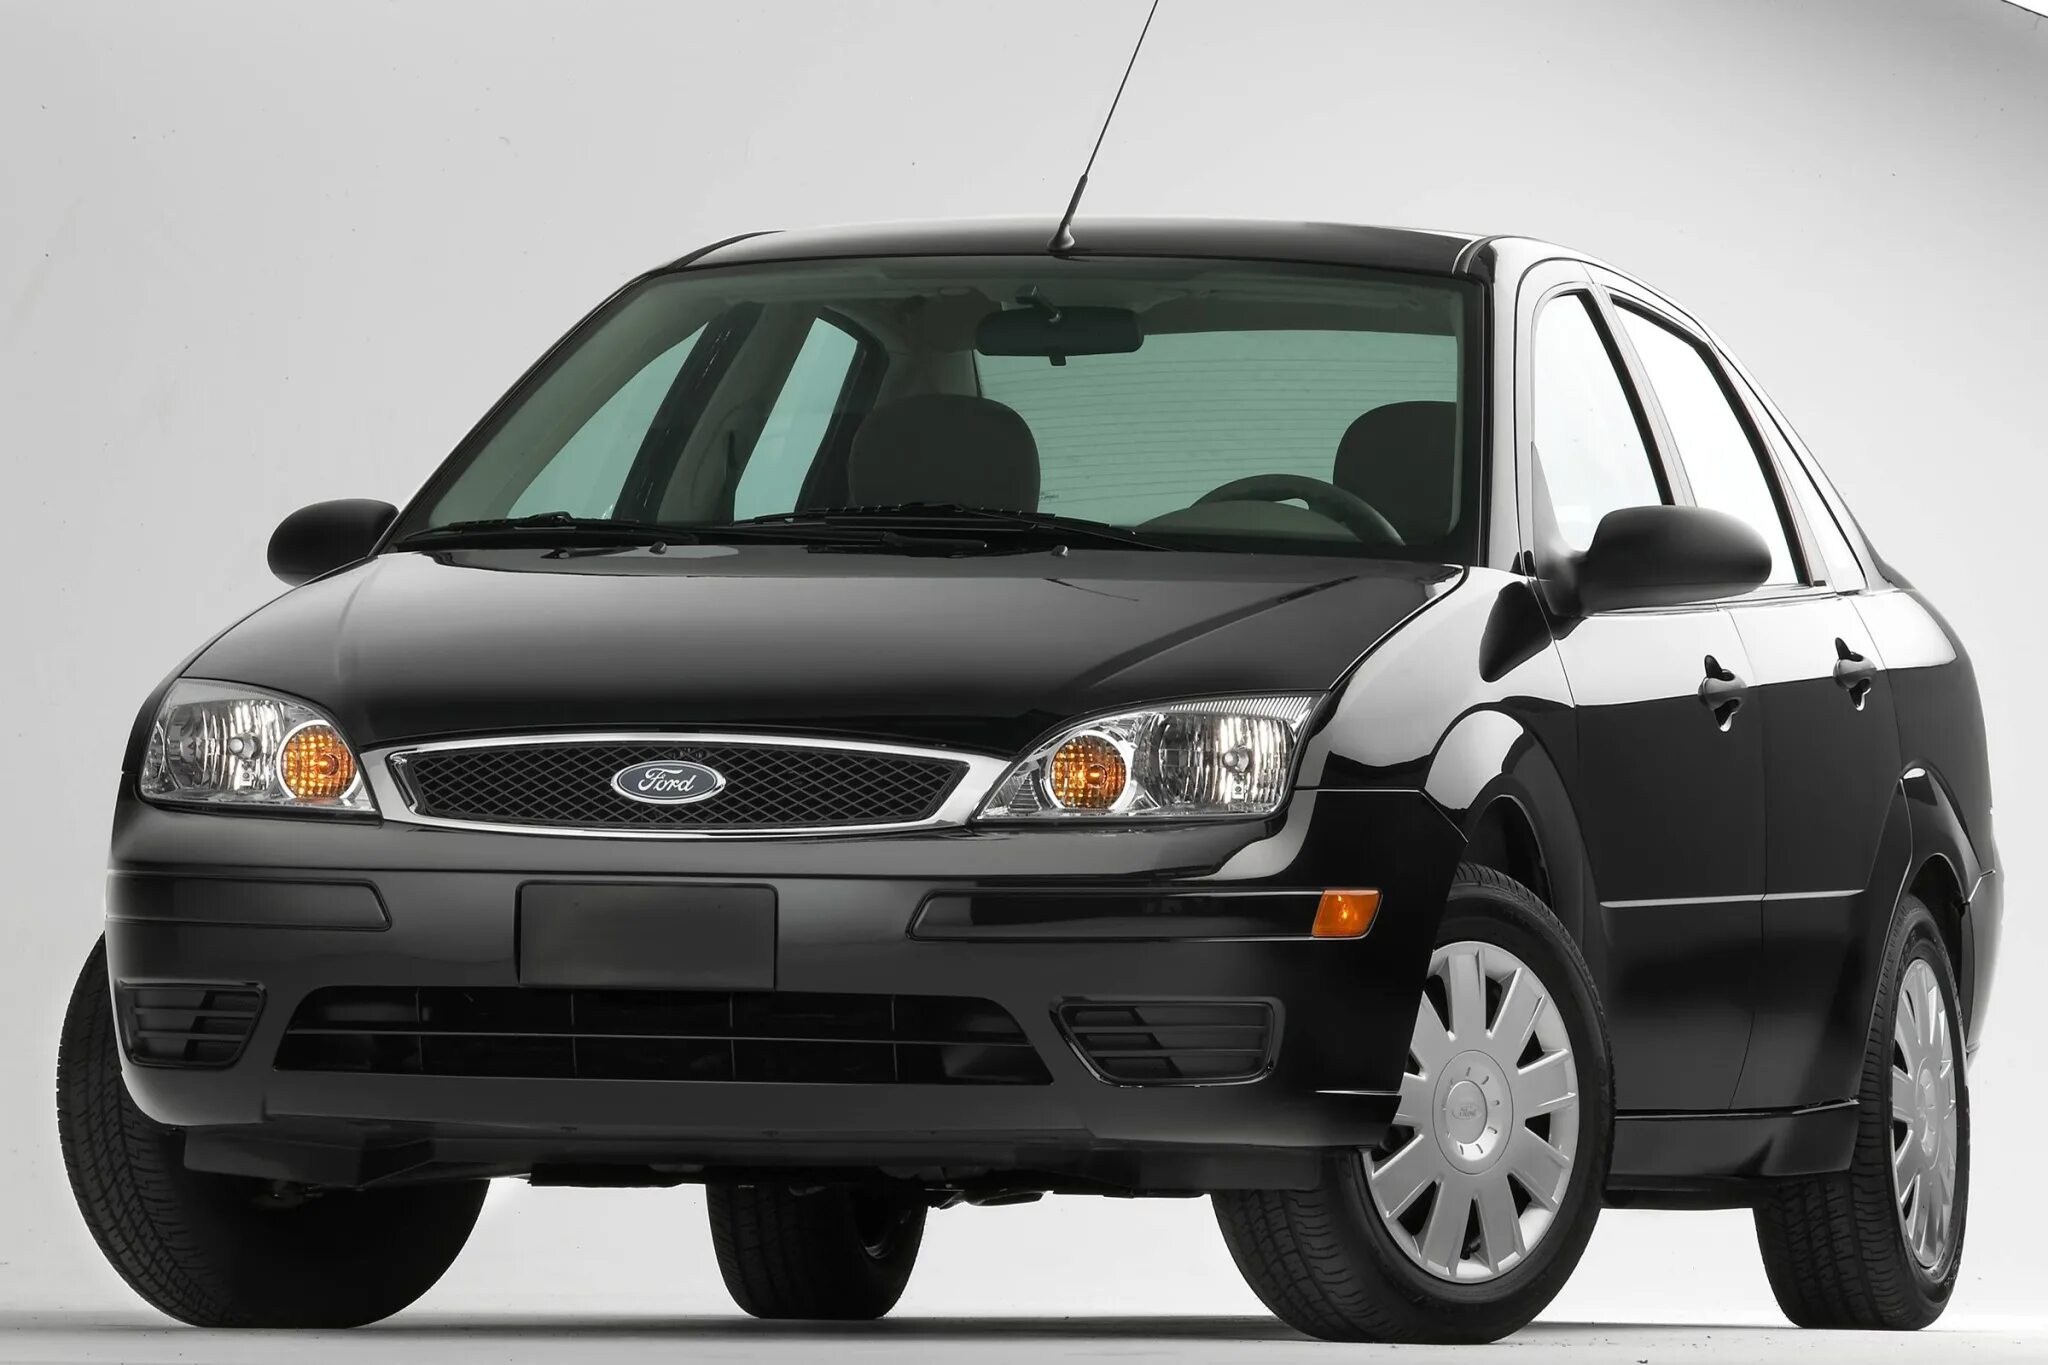 Форд 2005 г. Ford Focus zx4. Ford Focus 1 zx4. Форд фокус американец 2 2005. Ford Focus se zx4.